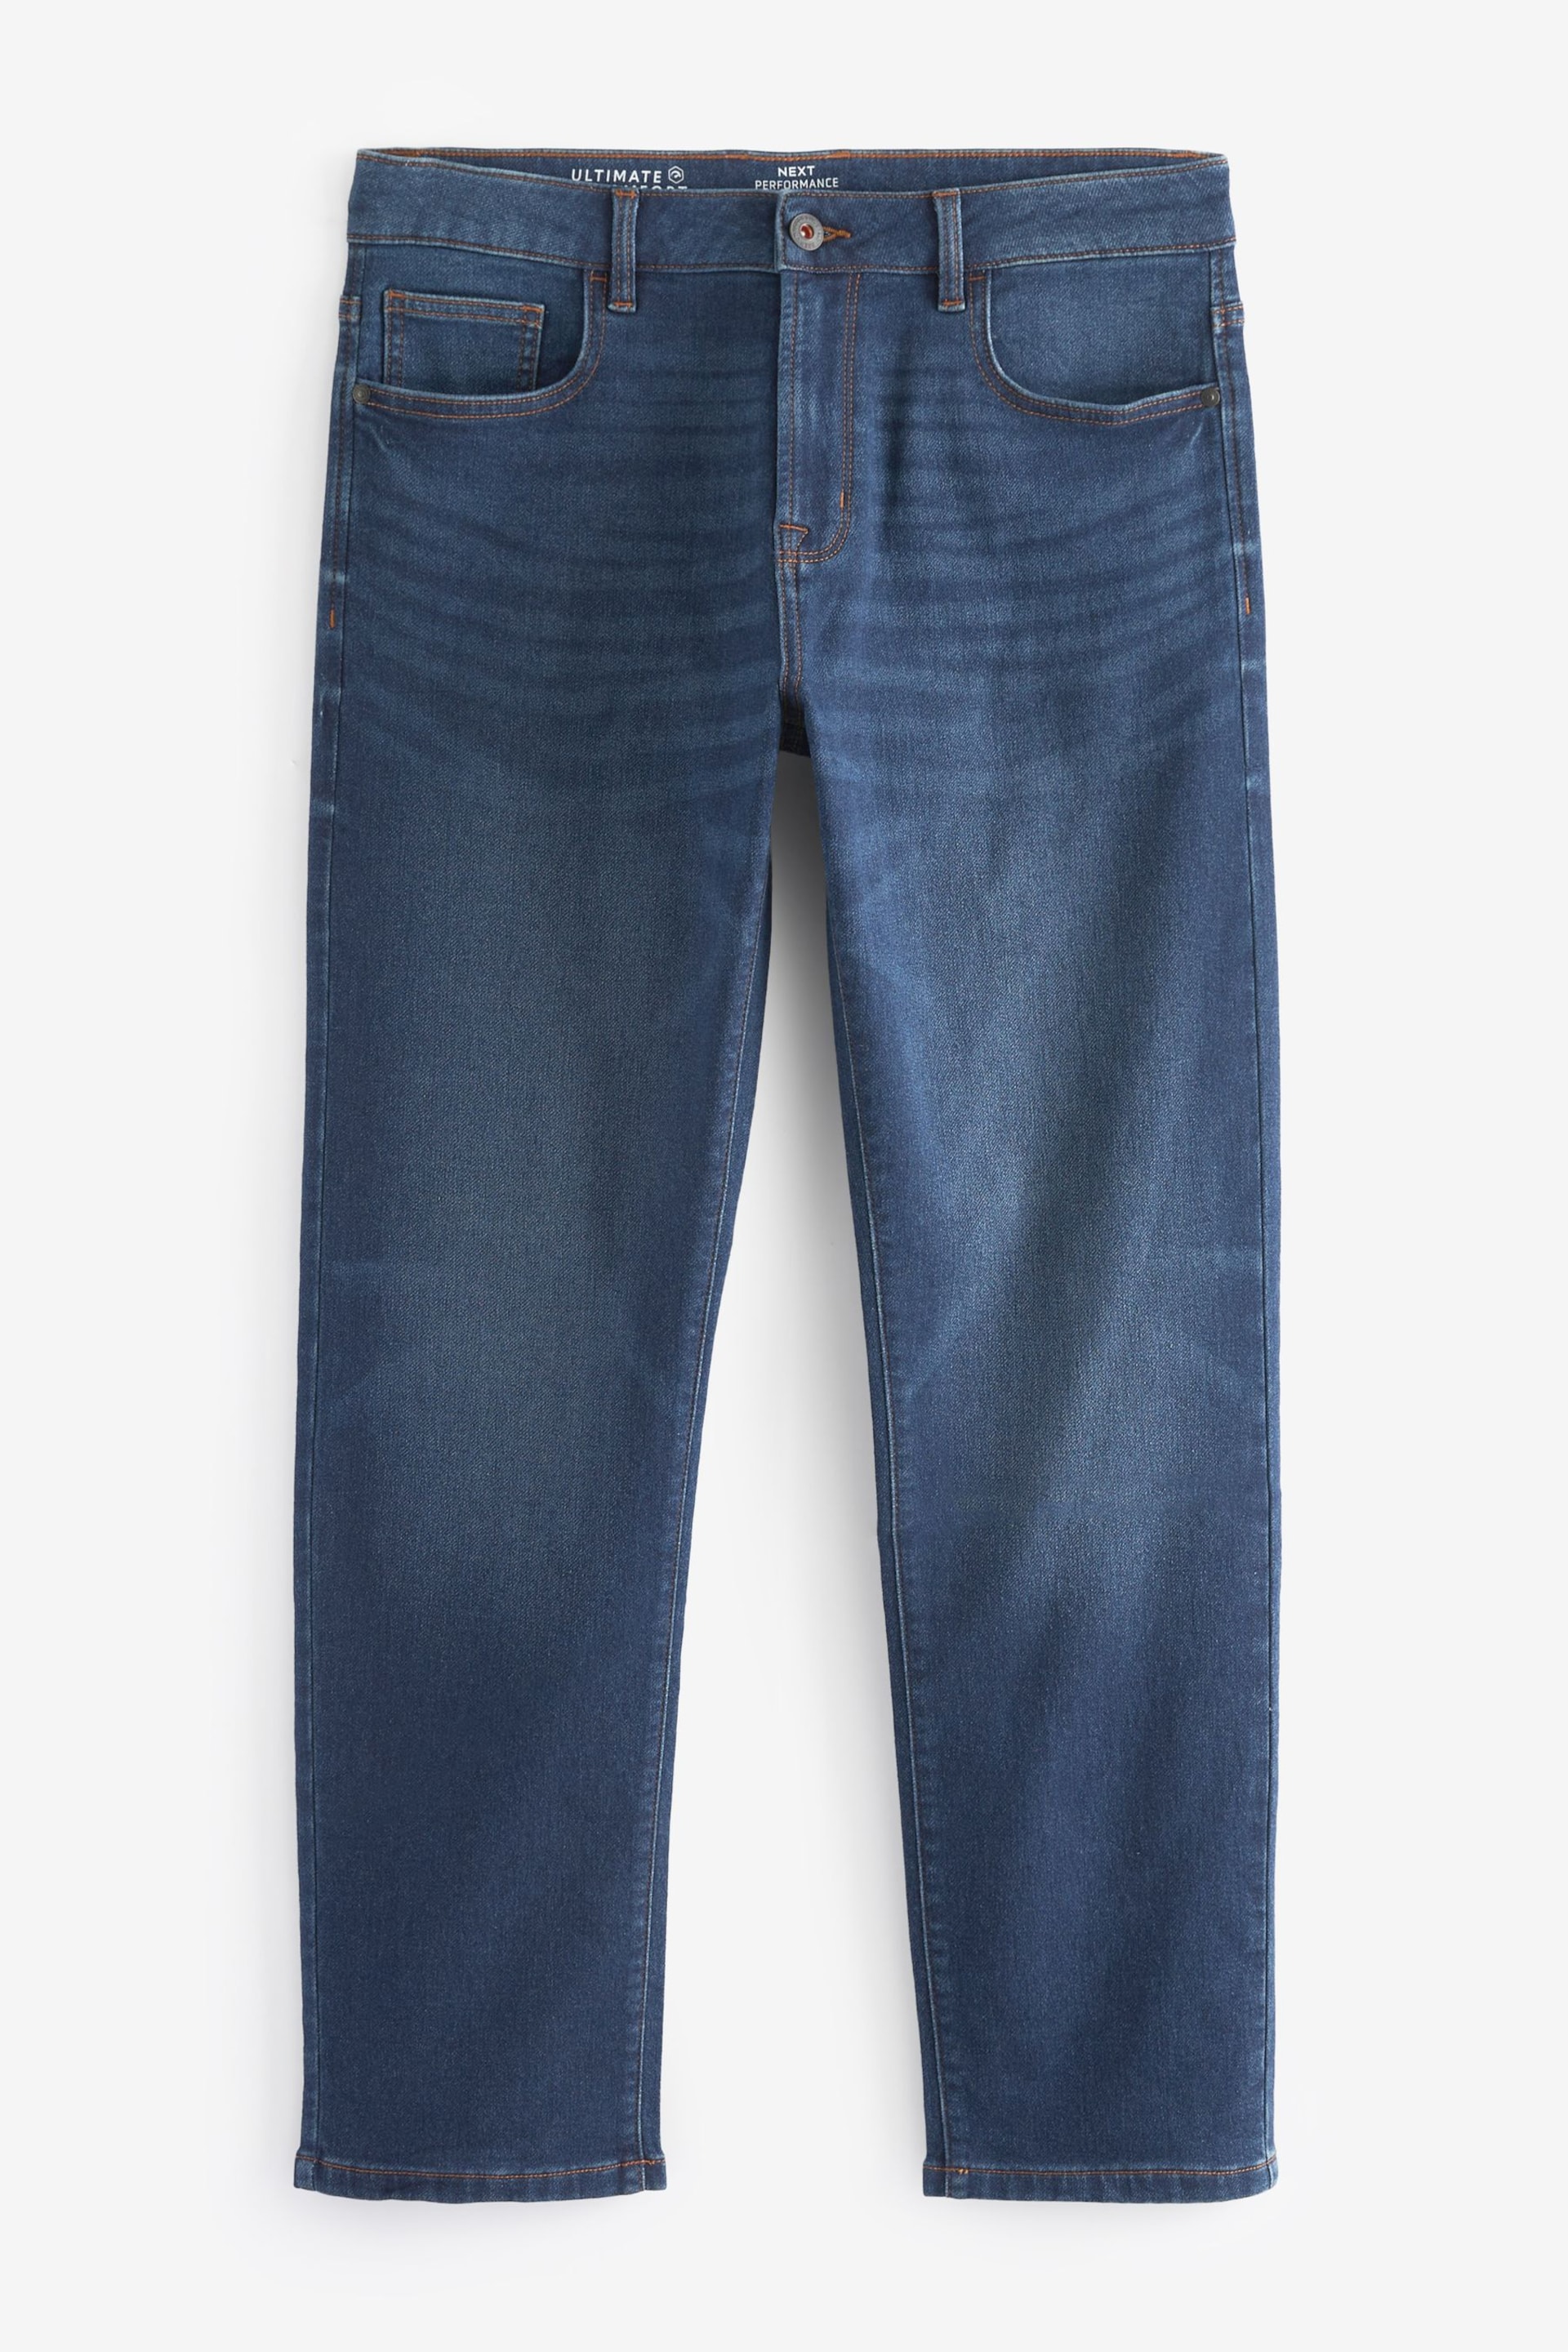 Blue Straight Fit Comfort Stretch Jeans - Image 7 of 11